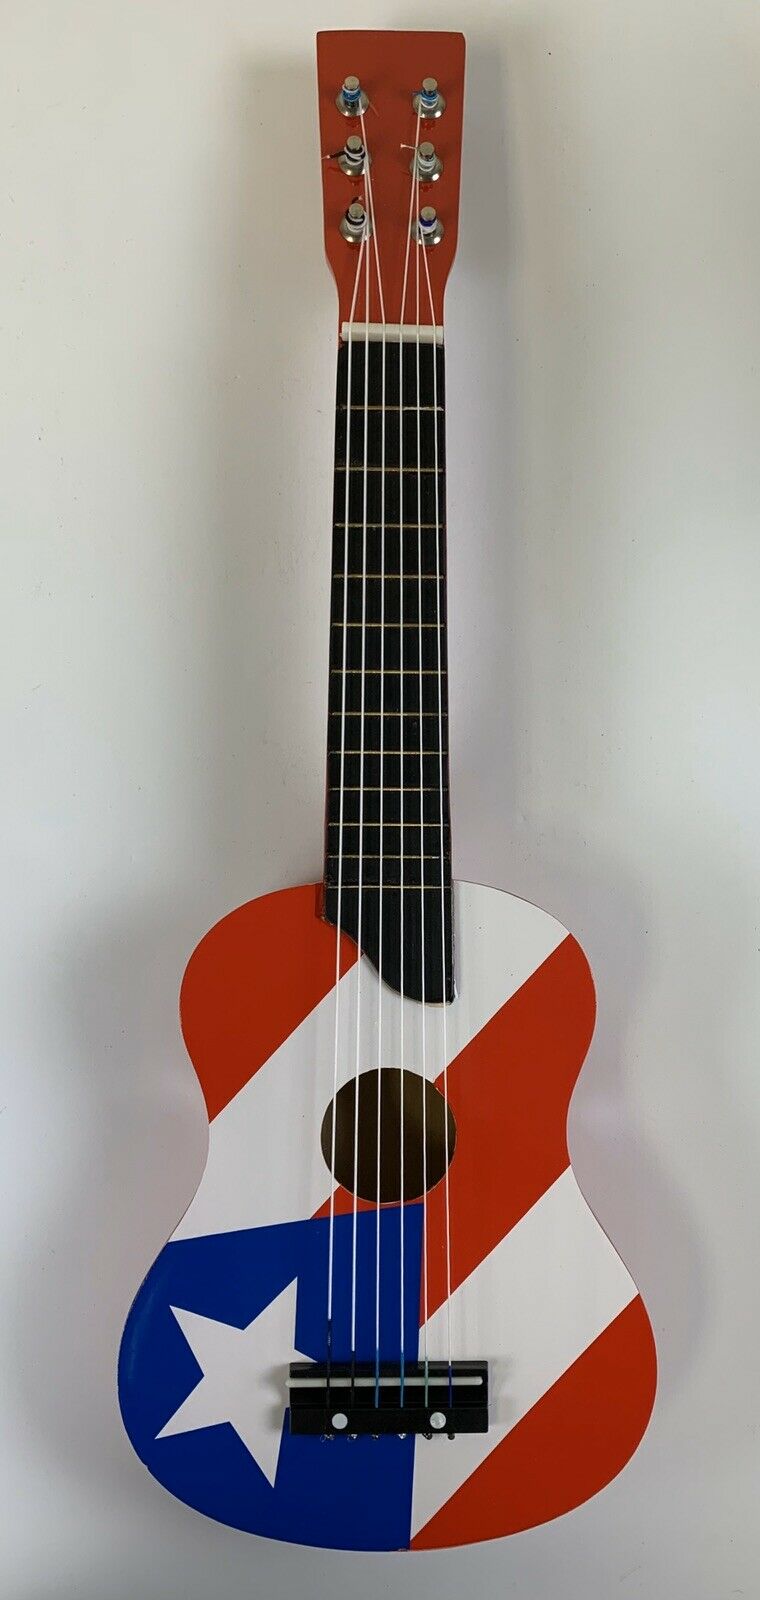 Small Guitar With Puerto Rico Flag Design. 23” X 7-1/2” X 2-1/4”.